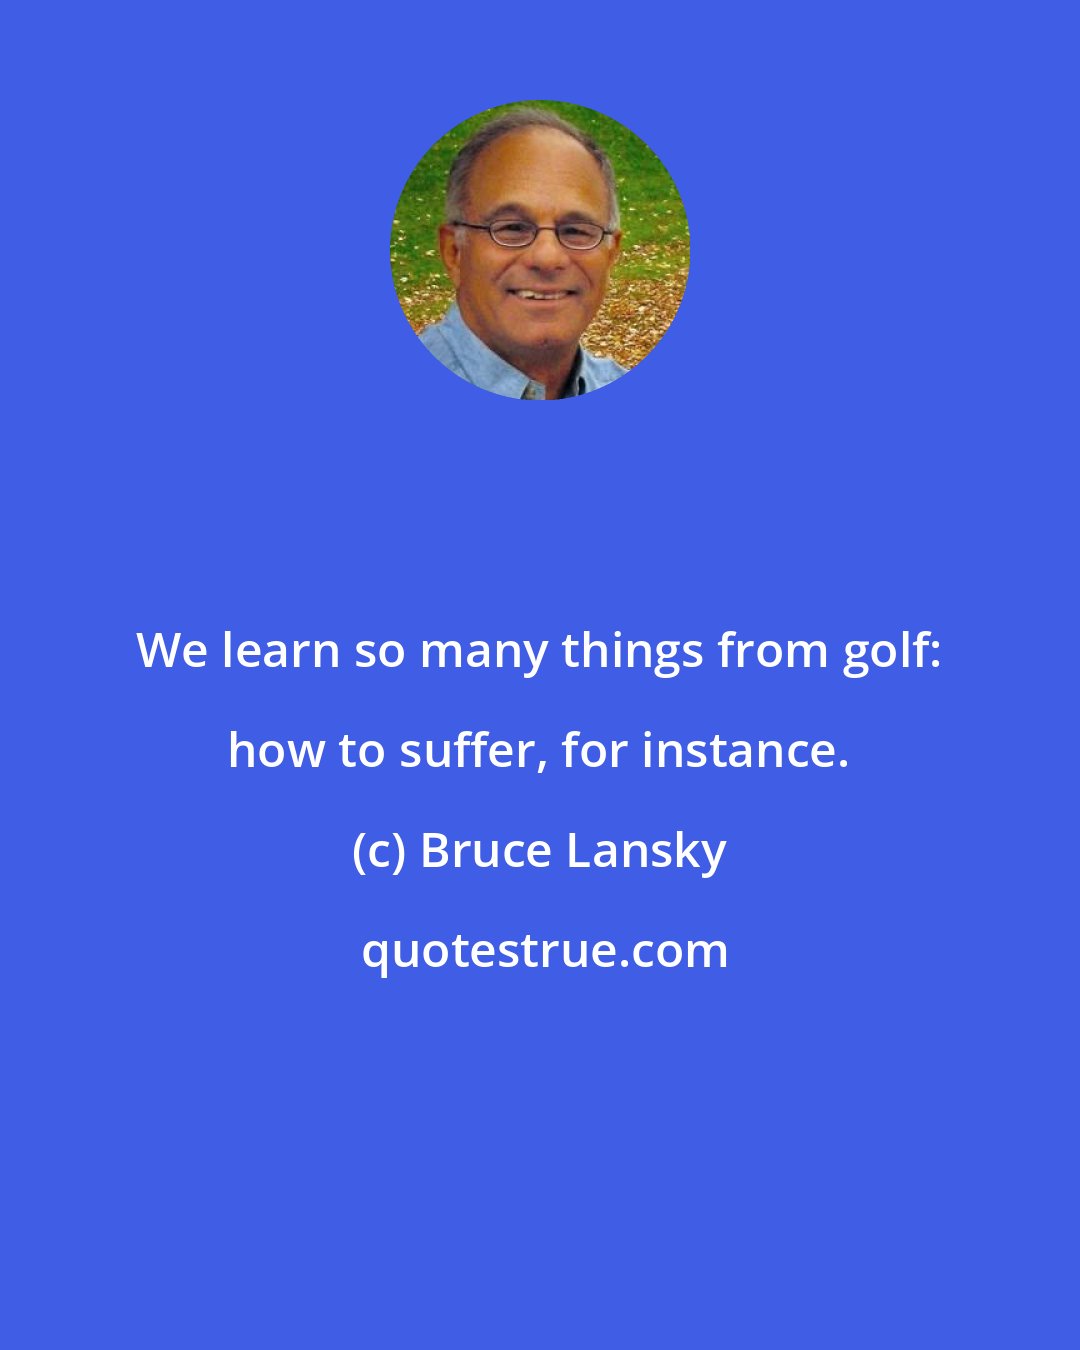 Bruce Lansky: We learn so many things from golf: how to suffer, for instance.